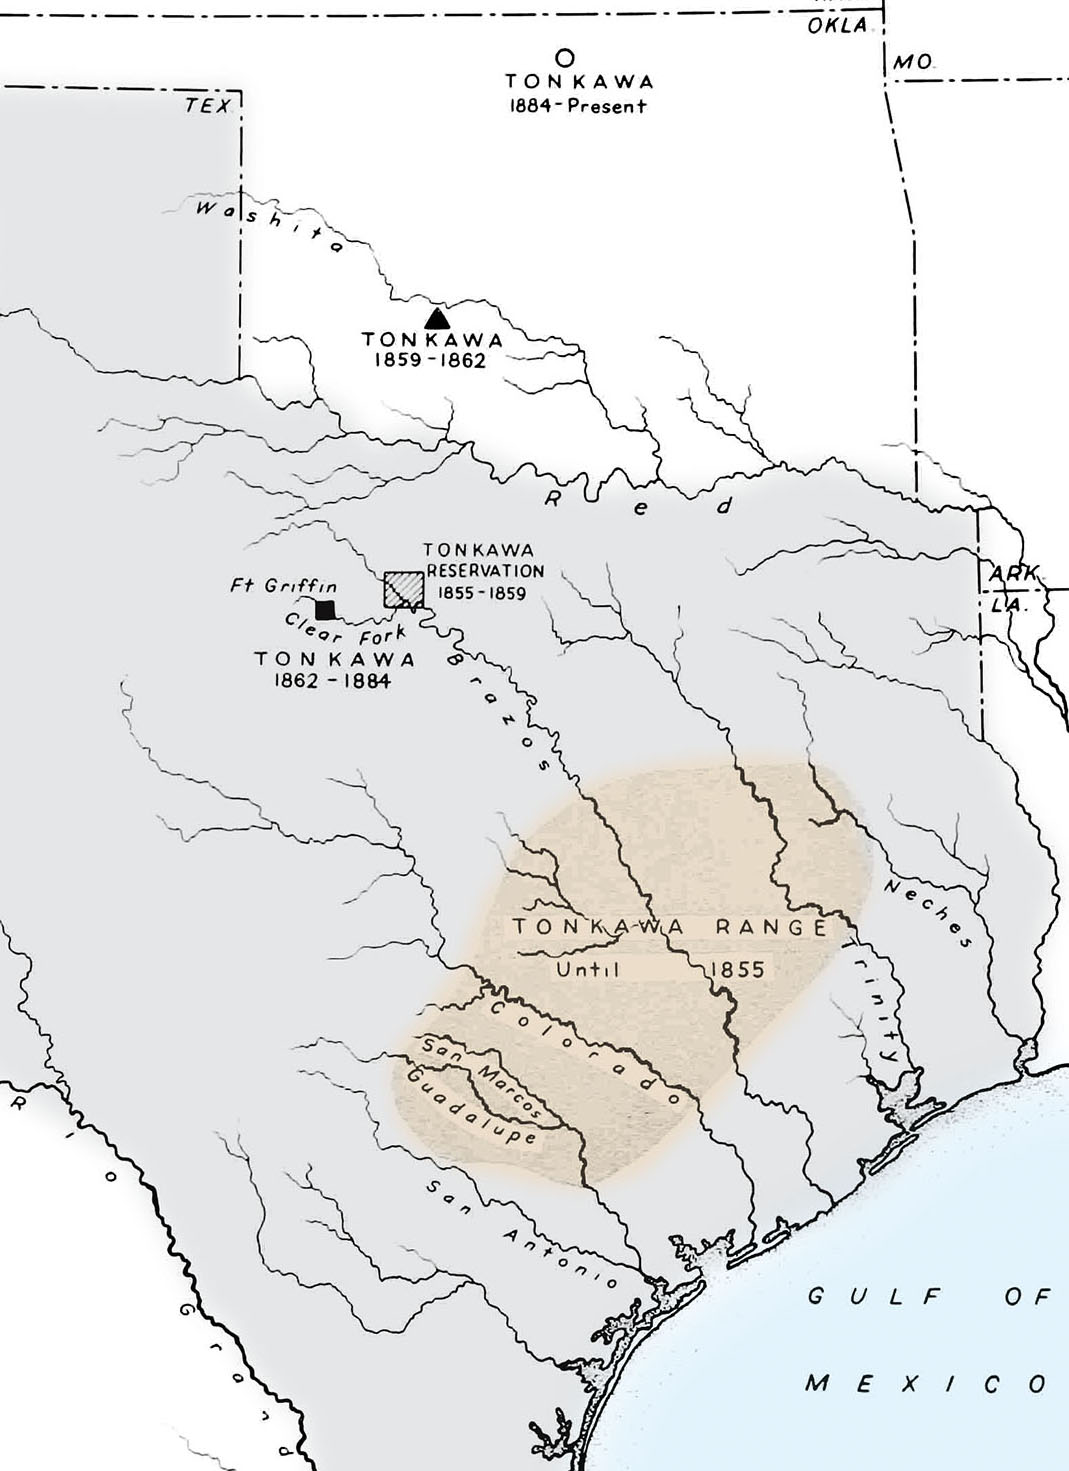 A map showing the location of the Tonkawa tribe at various points in history. A tan region in central Texas highlights their range "until 1855"